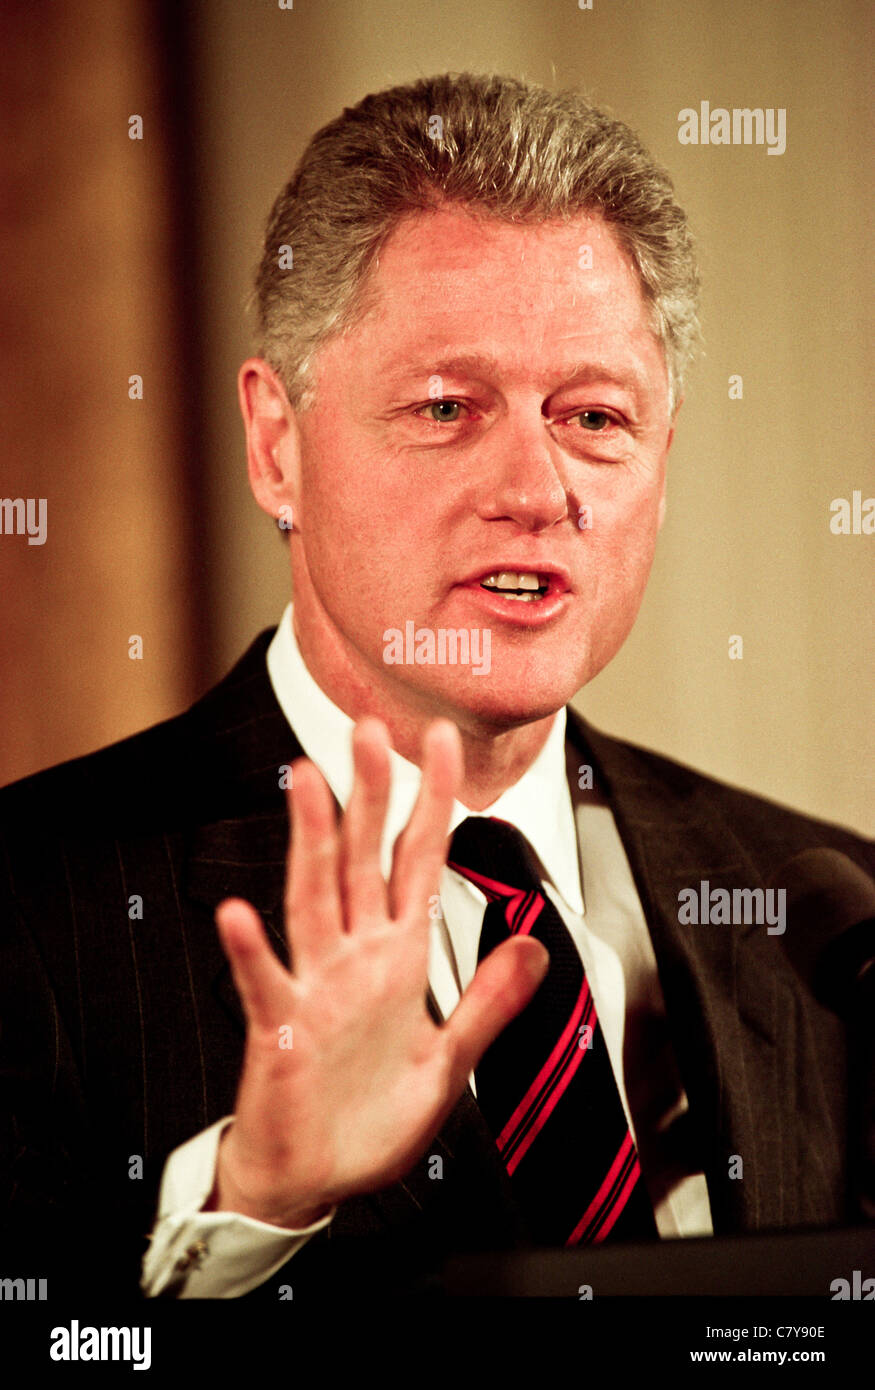 President Bill Clinton pauses during an event in the East Room of the White House January 13, 1999 Stock Photo